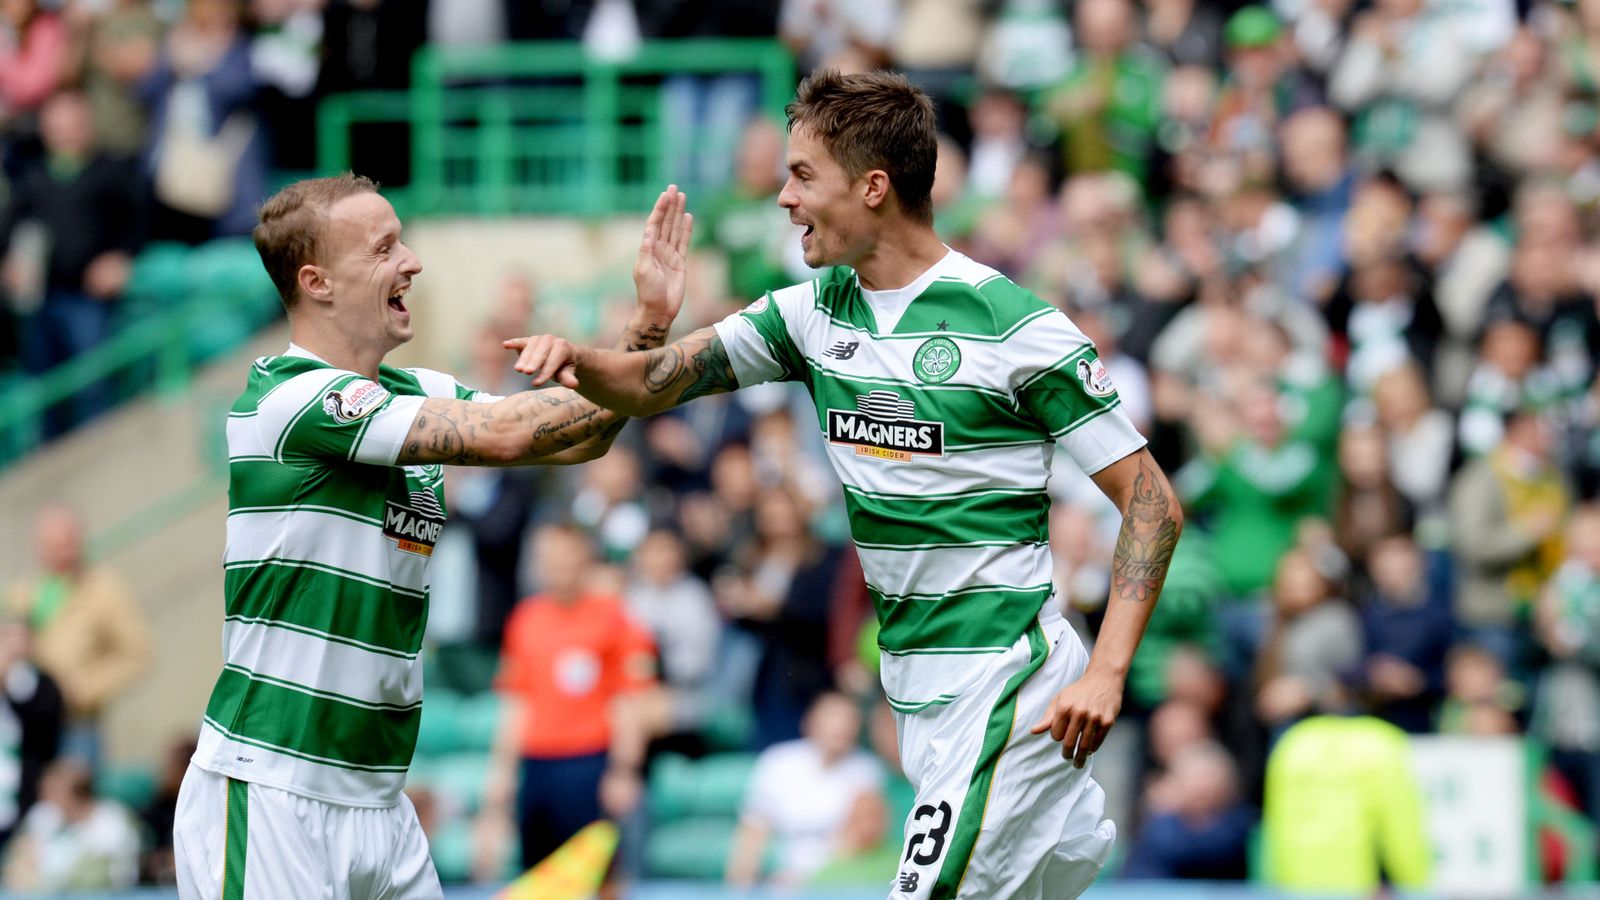 Celtic 4 - 2 Inverness - Match Report & Highlights1600 x 900